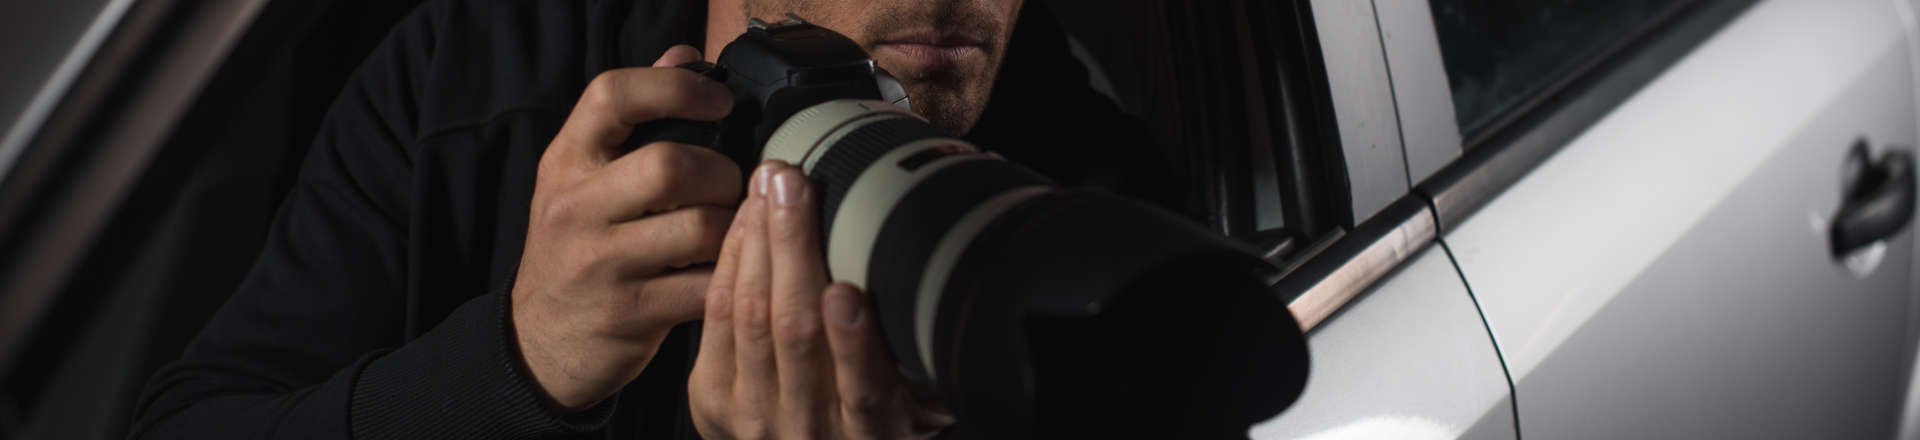 Hiring a Quality Private Investigator Can Save You Money in West Hollywood West Hollywood, CA